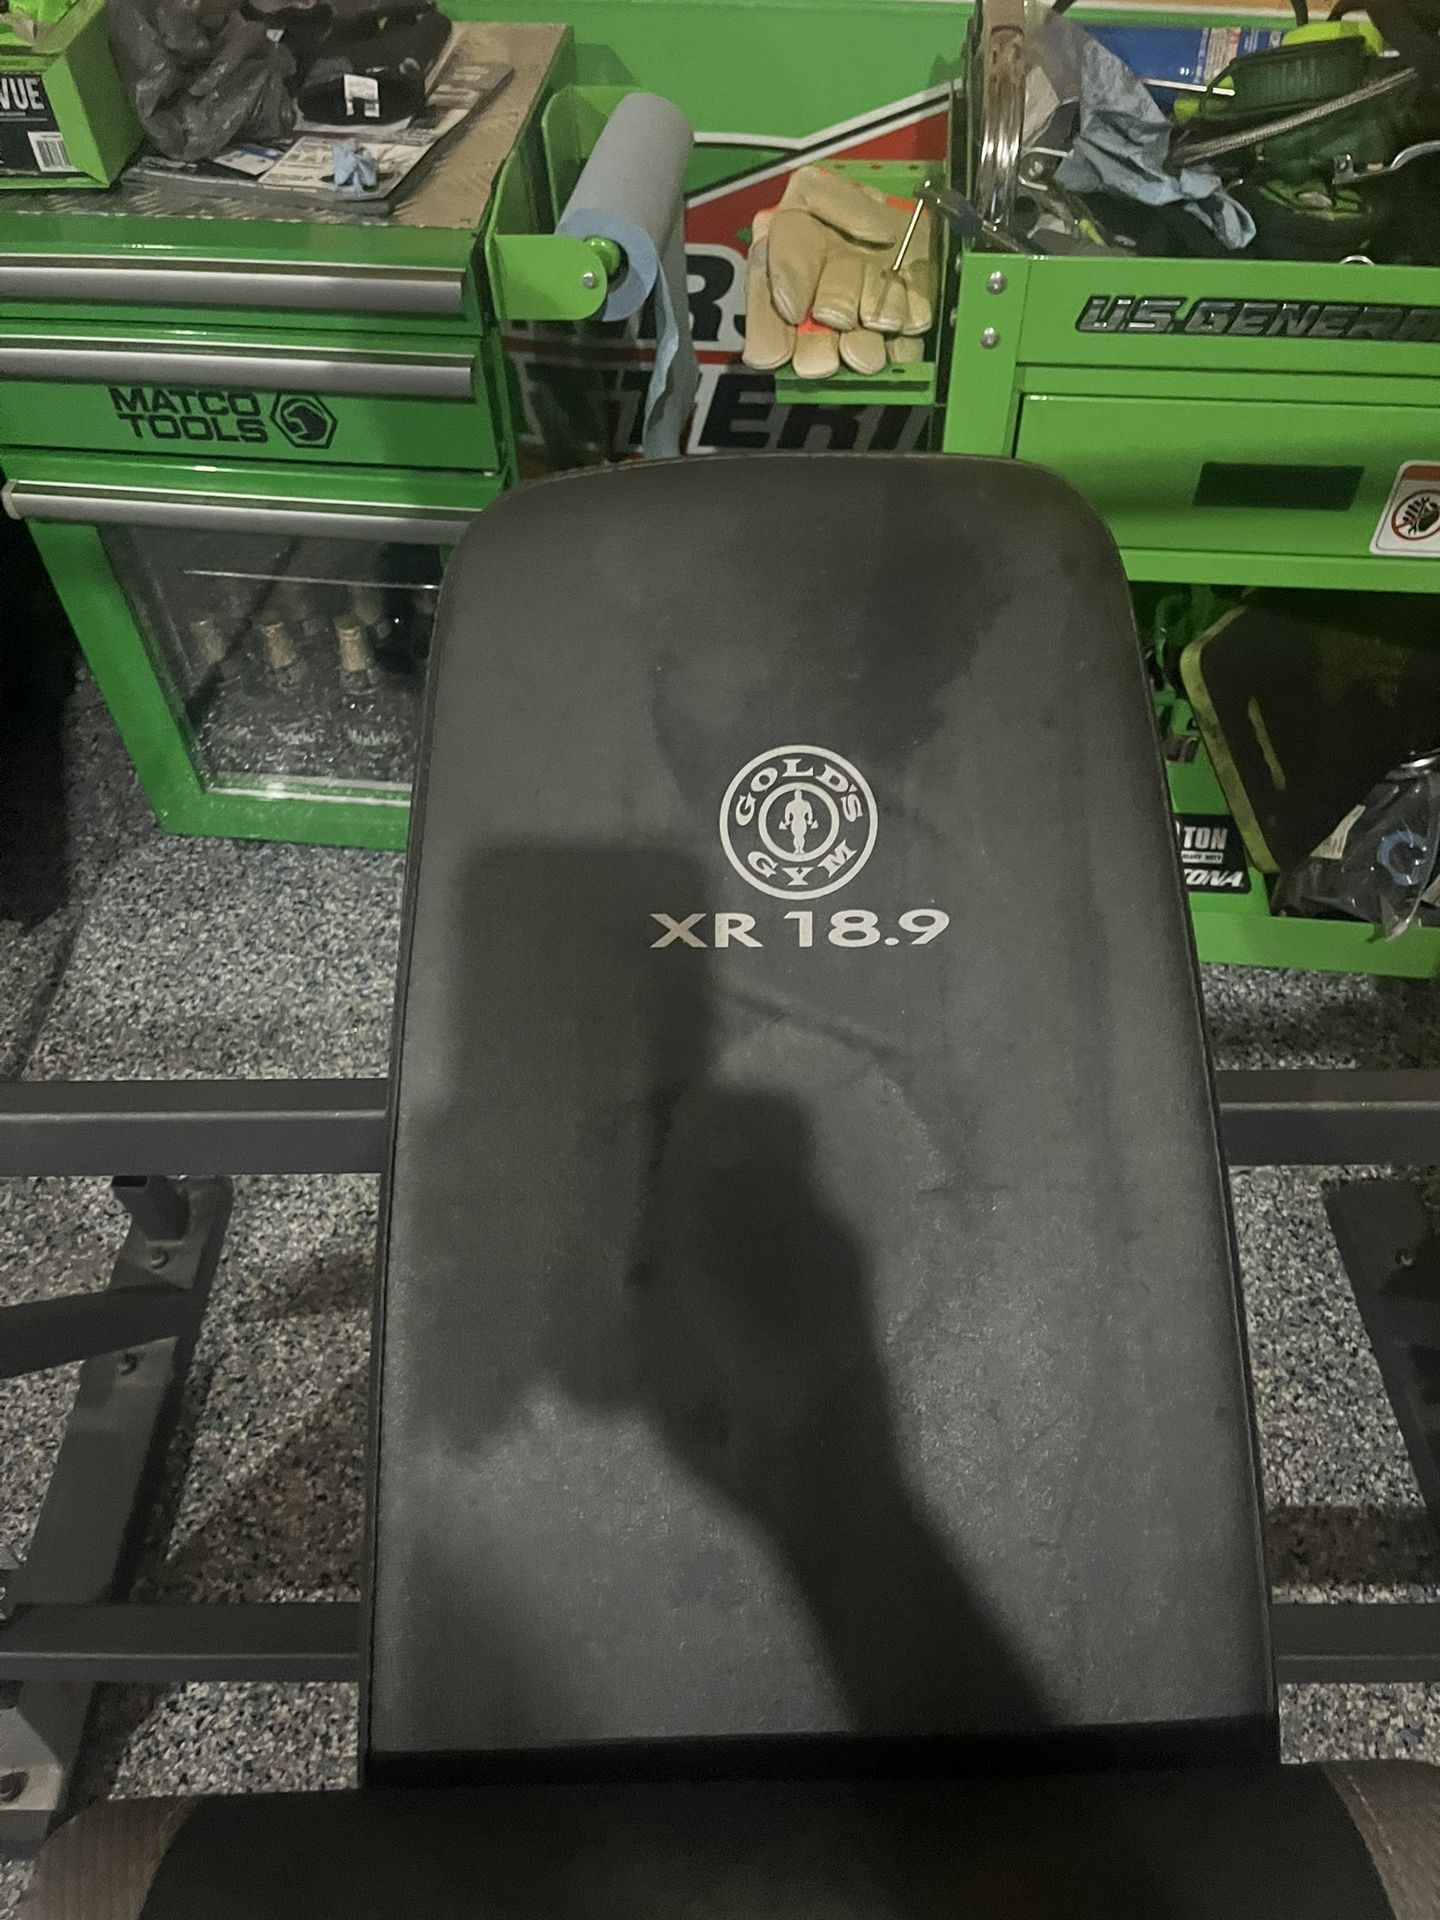 Gold’s Gym Weight Bench